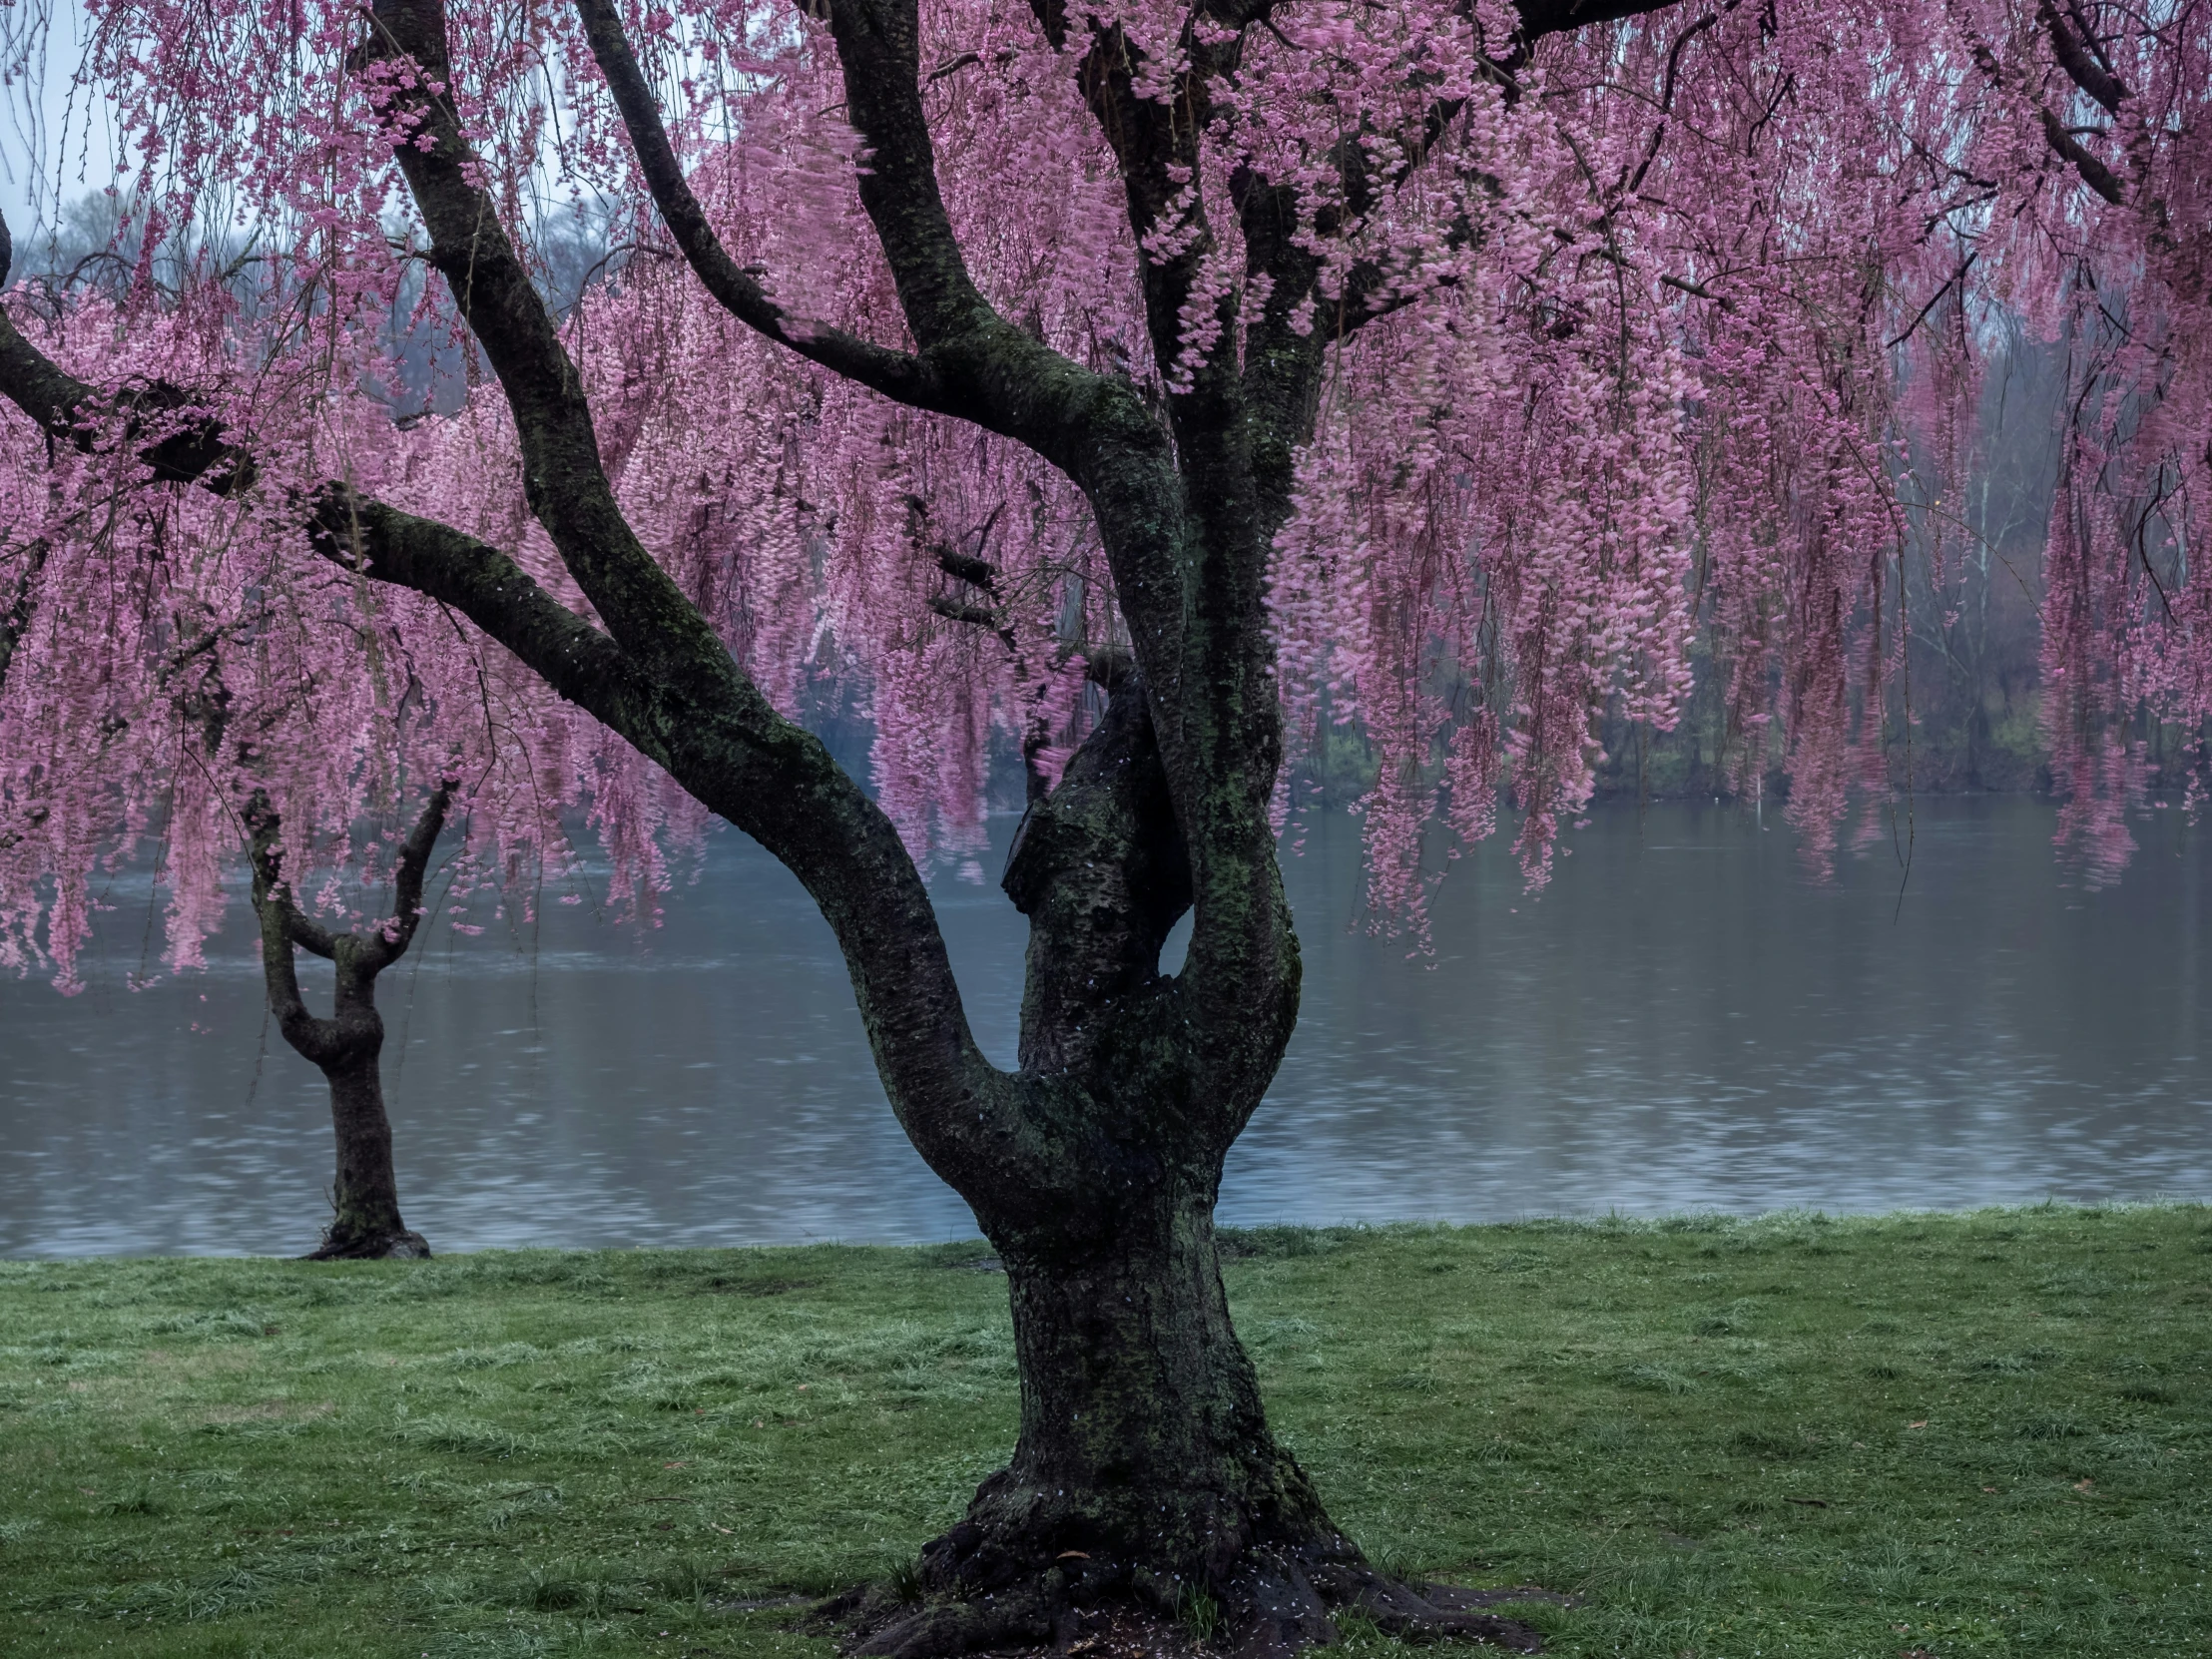 trees with pink flowers are in the foreground near a body of water